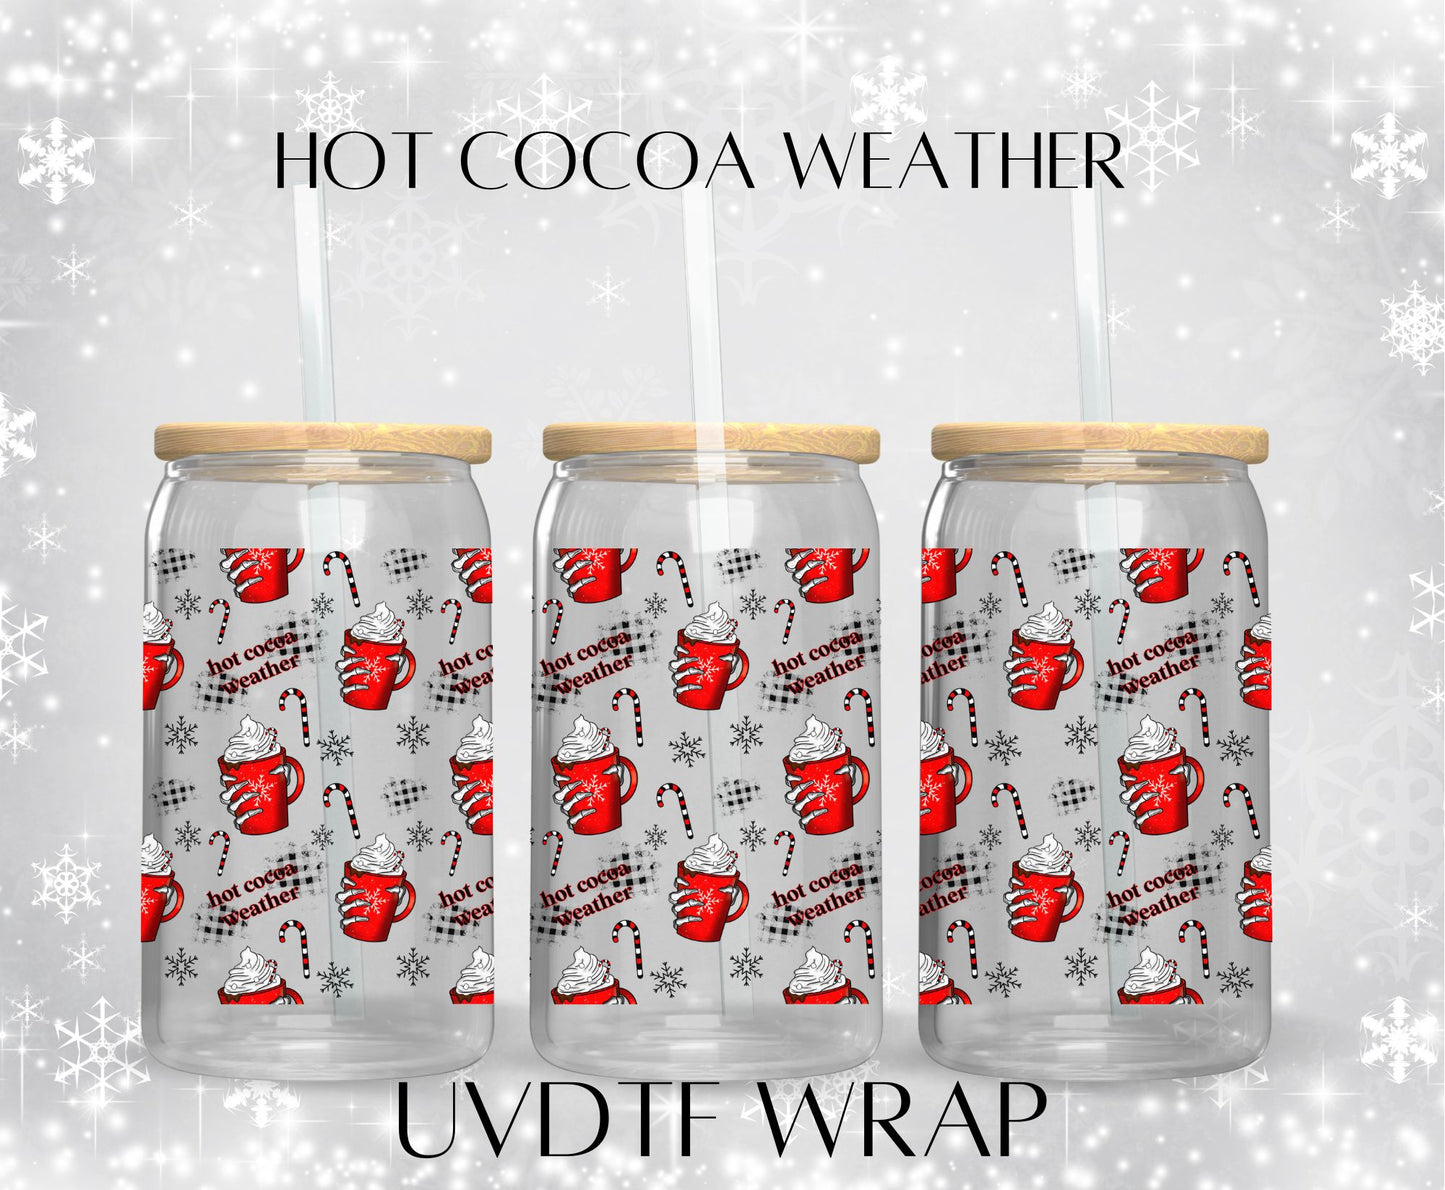 Hot Cocoa Weather UVDTF WRAP